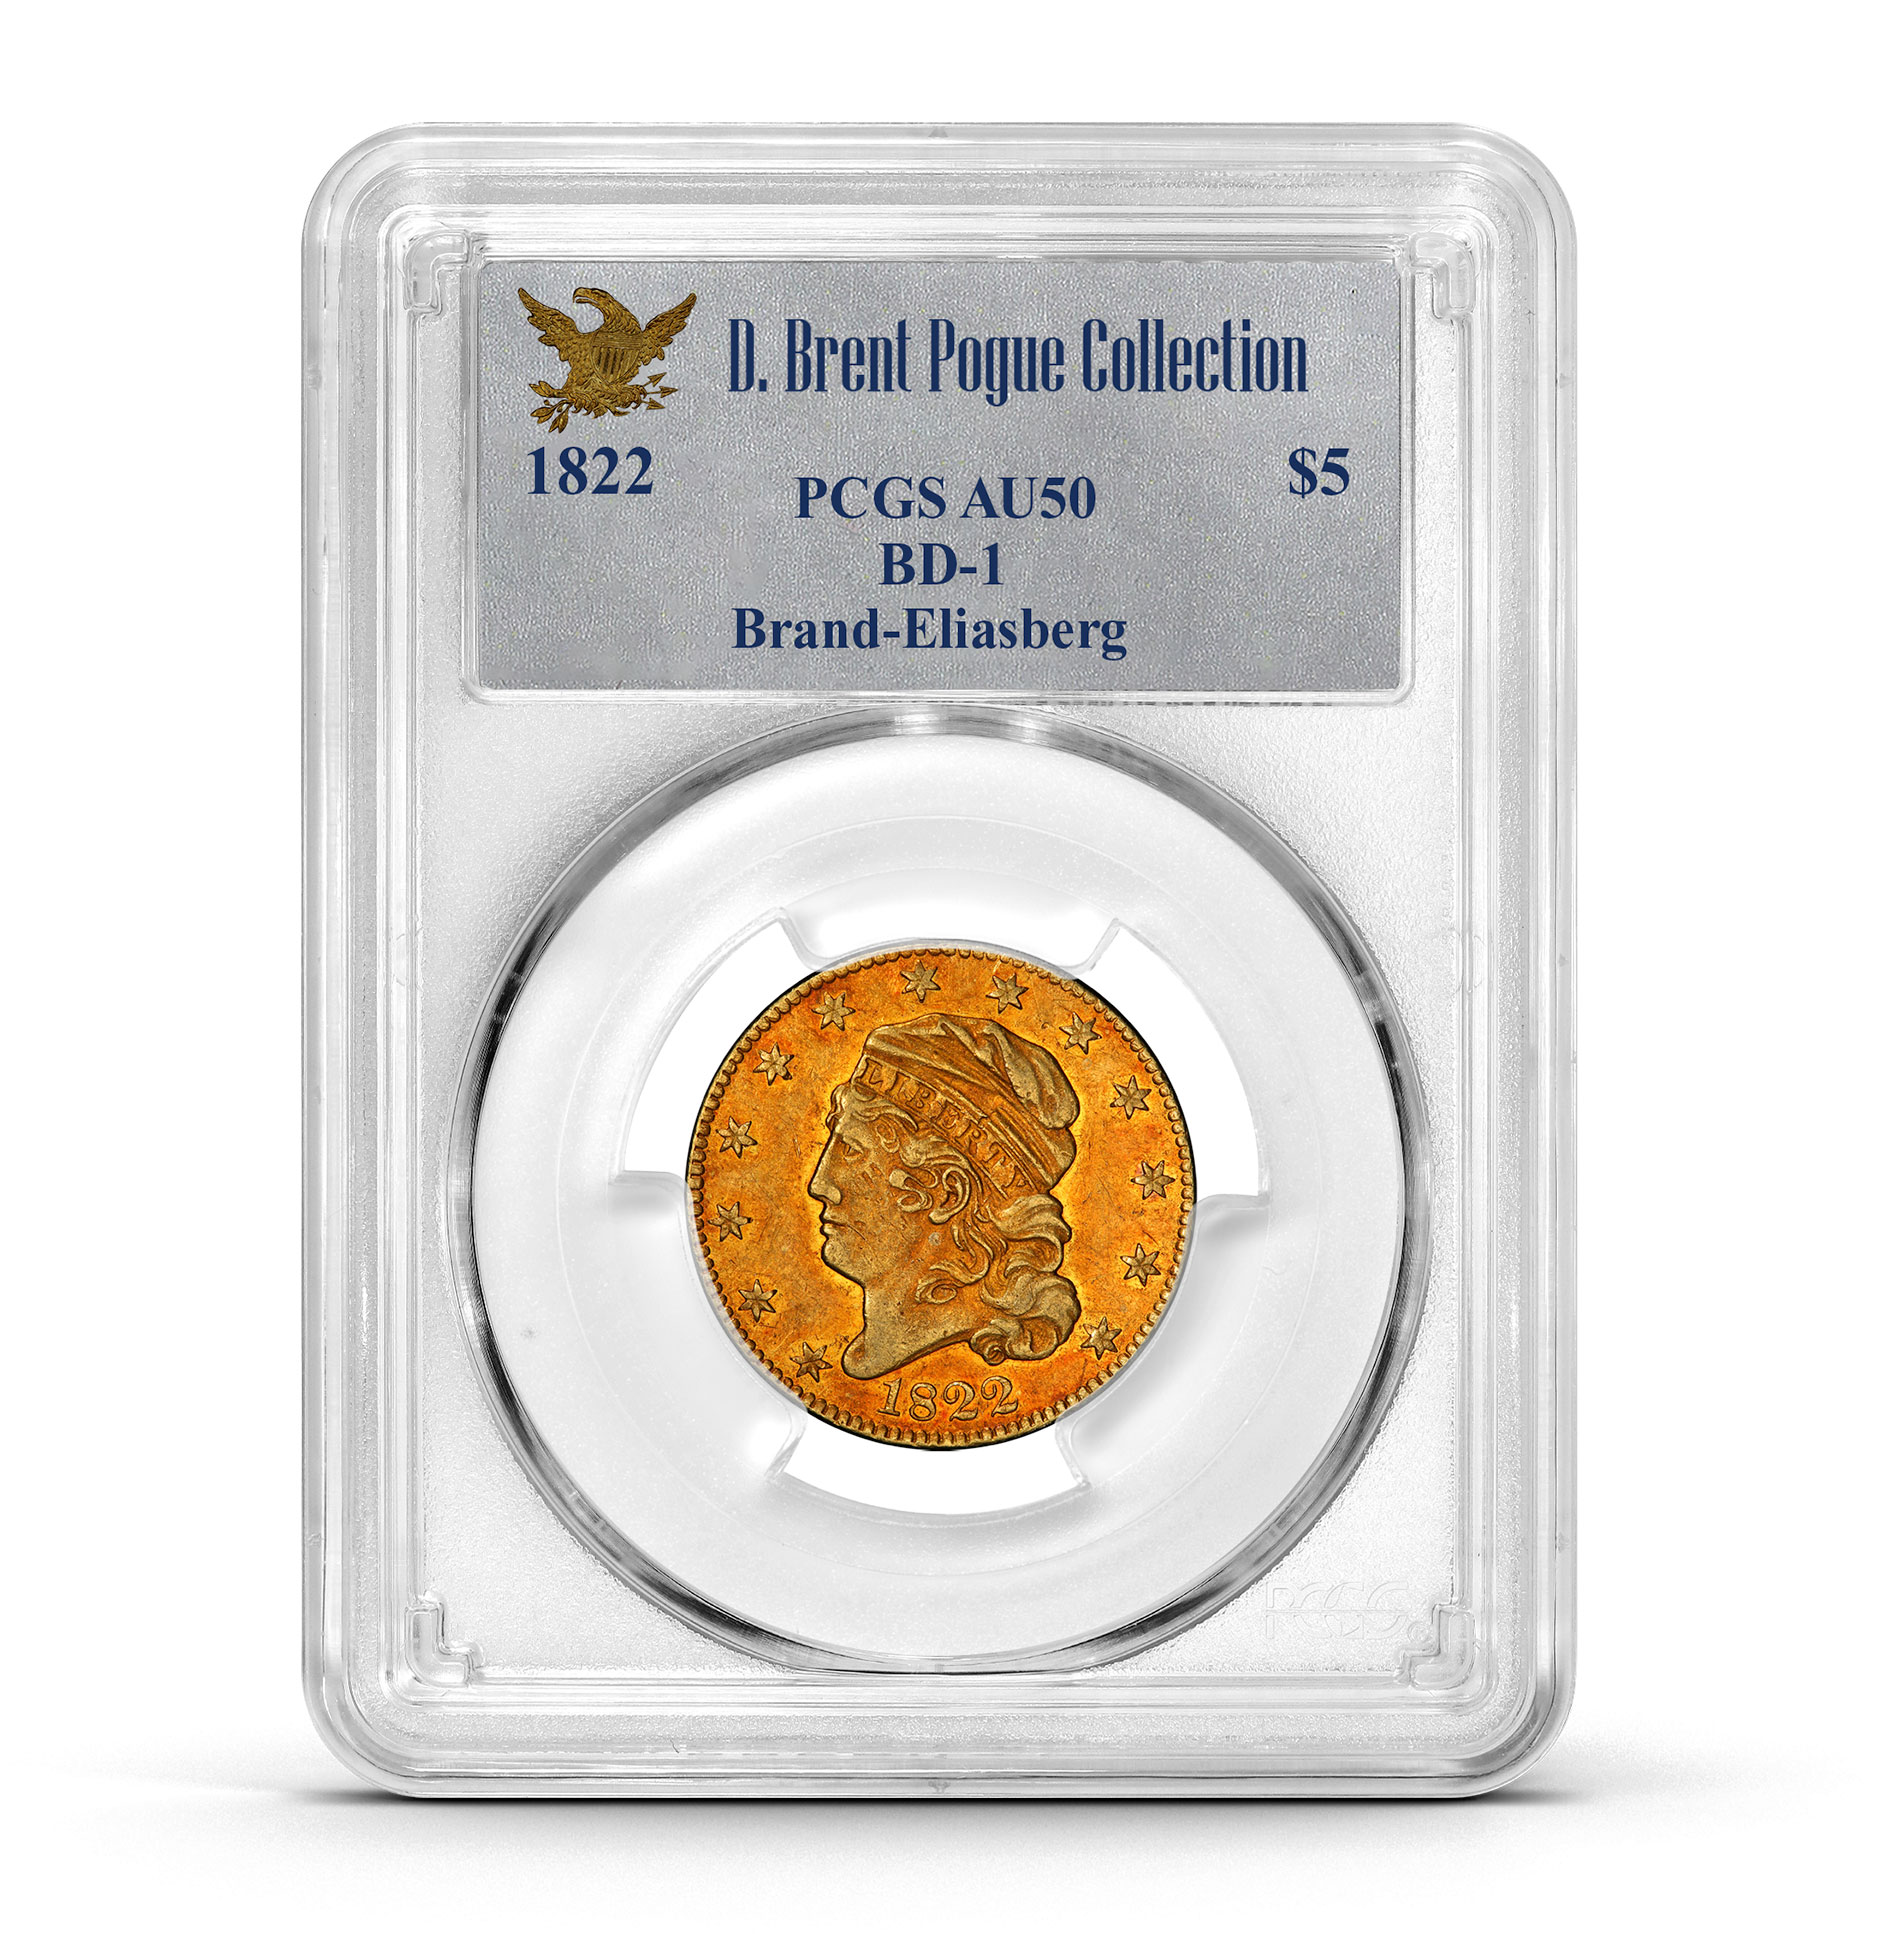 How Too  Coin collecting, Coin grading, Rare coins worth money